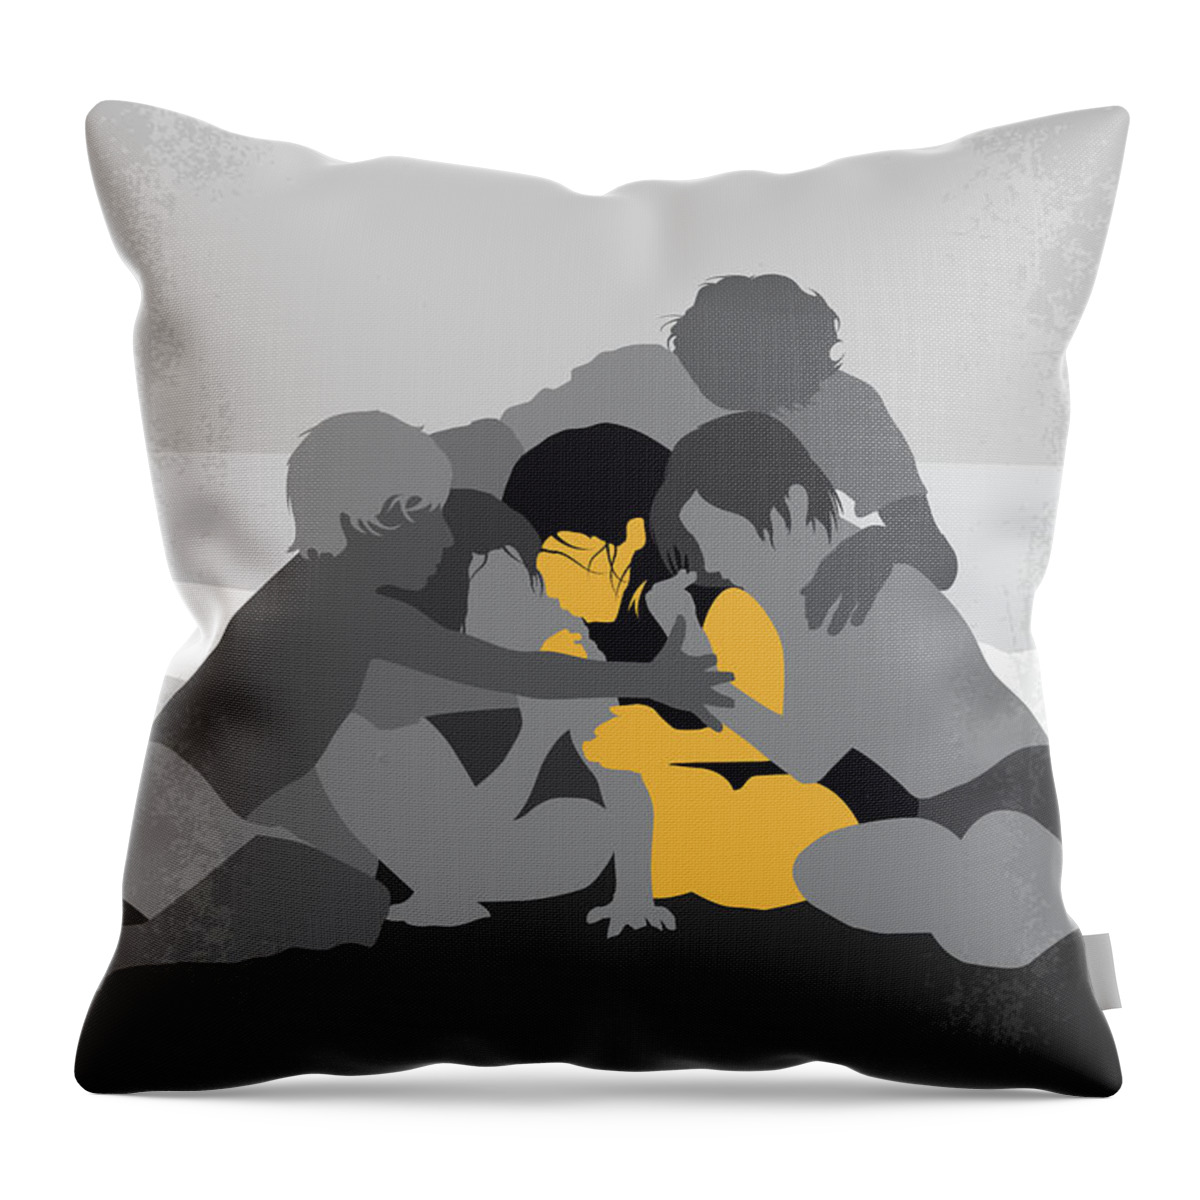 Roma Throw Pillow featuring the digital art No1035 My Roma minimal movie poster by Chungkong Art